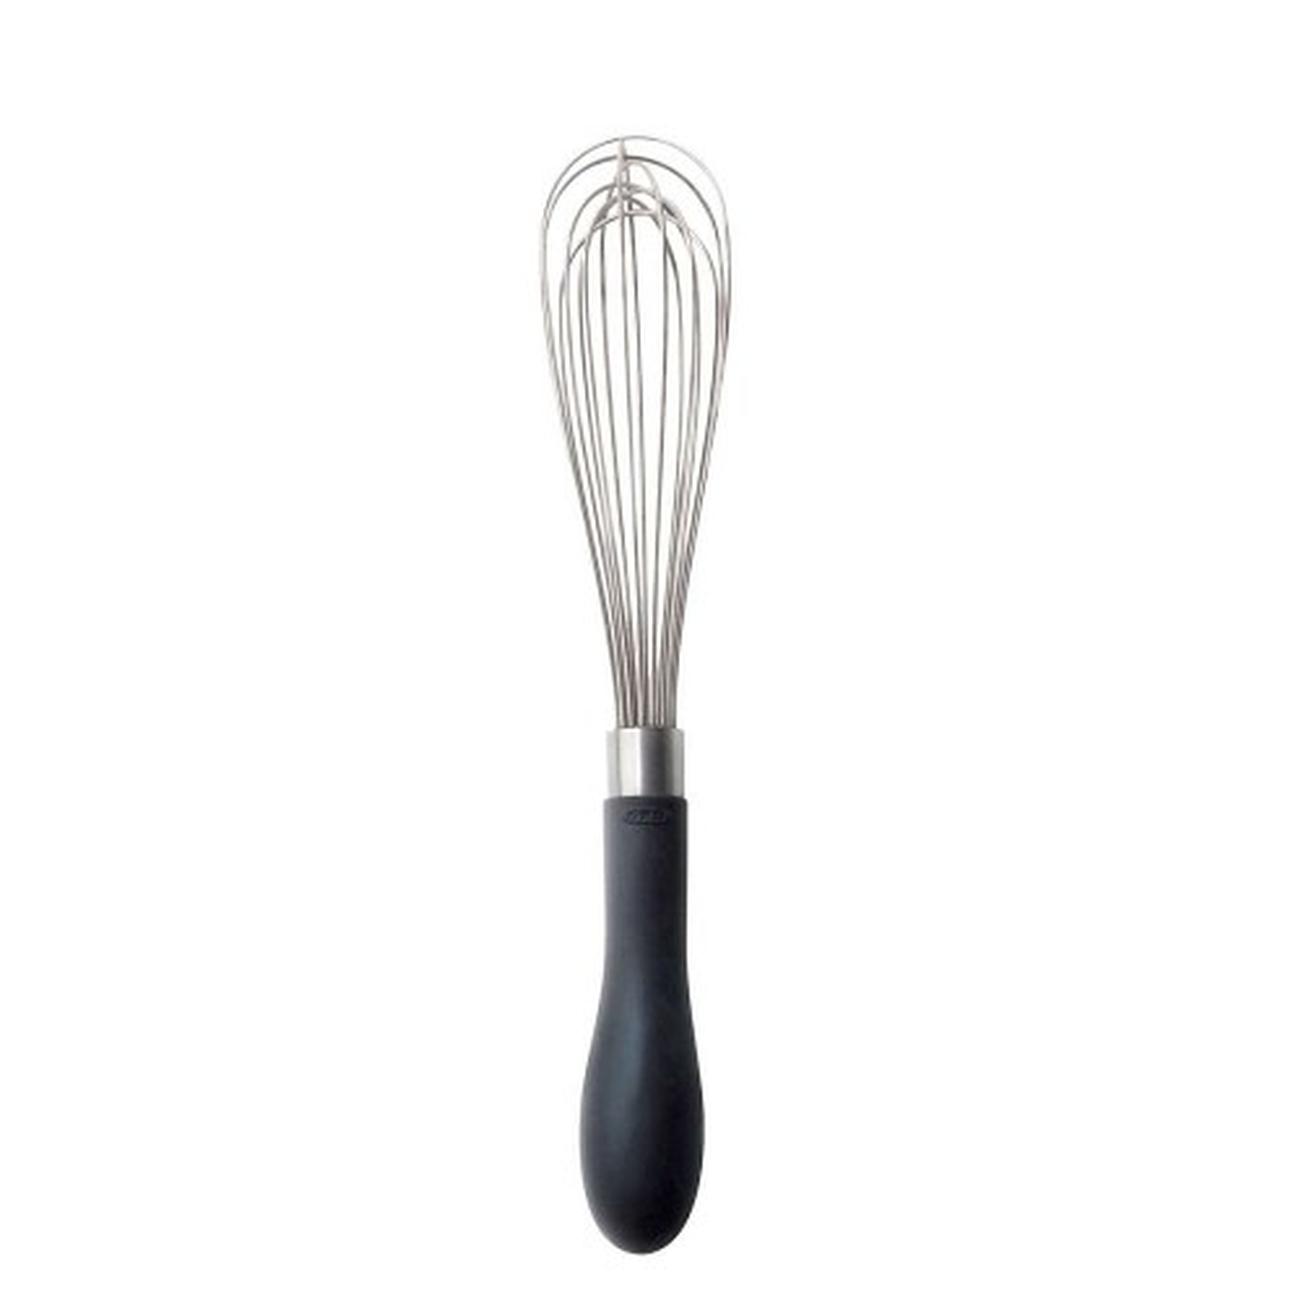 https://www.thekitchenwhisk.ie/contentfiles/productImages/Large/OXO-Balloon-Whisk-9-inch-Good-Grips.jpg